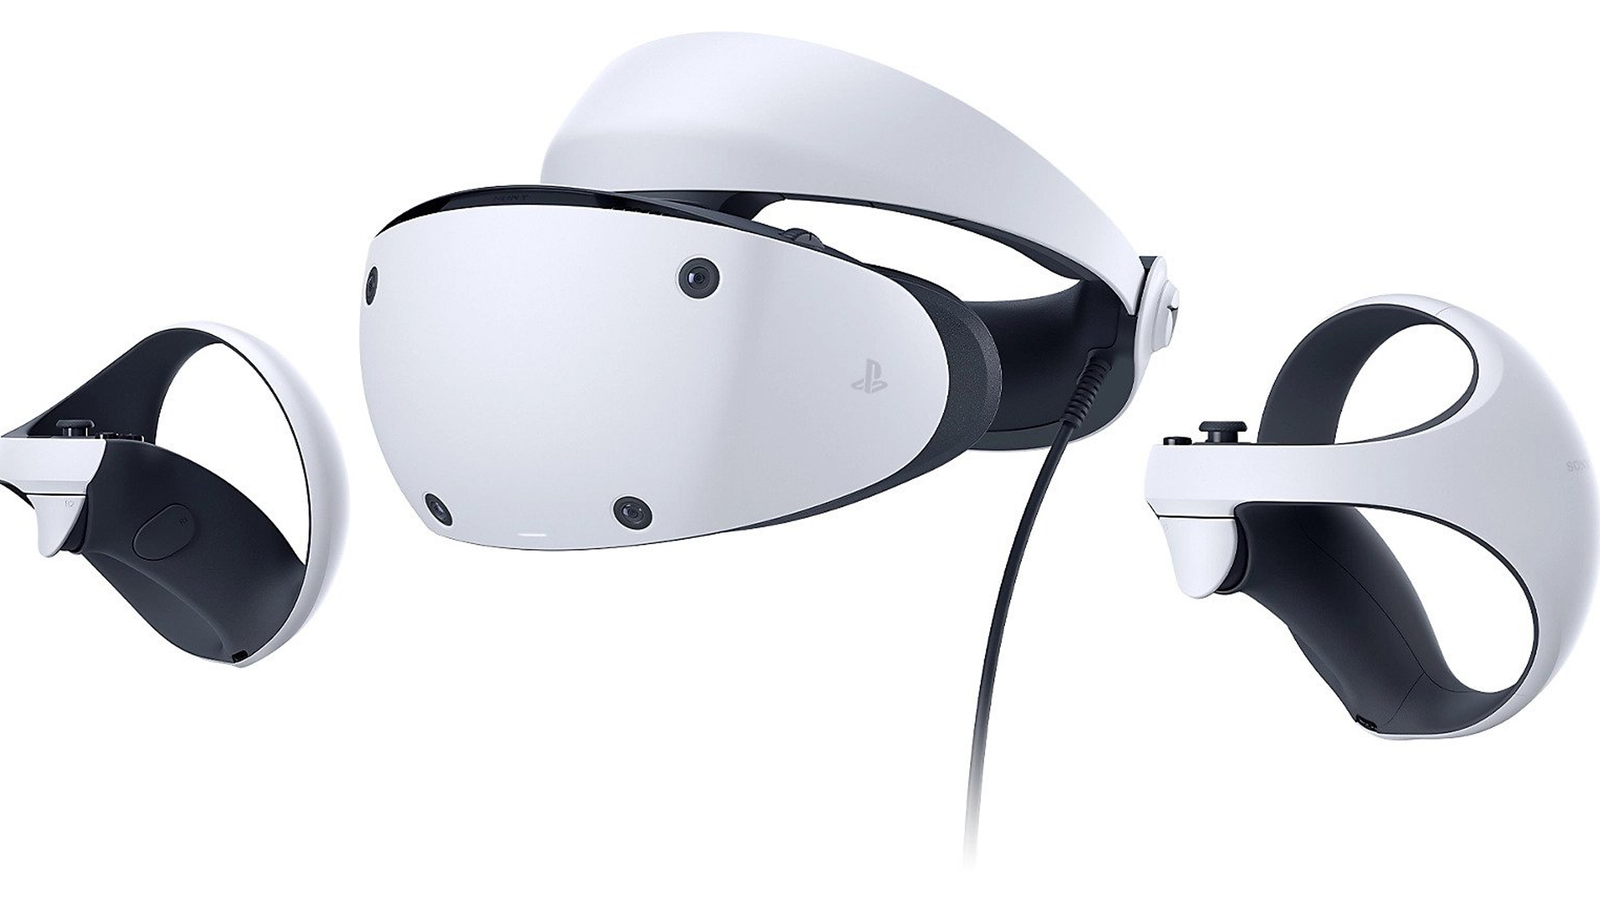 PlayStation VR 2 headset for PS5 has JUST been announced! Check